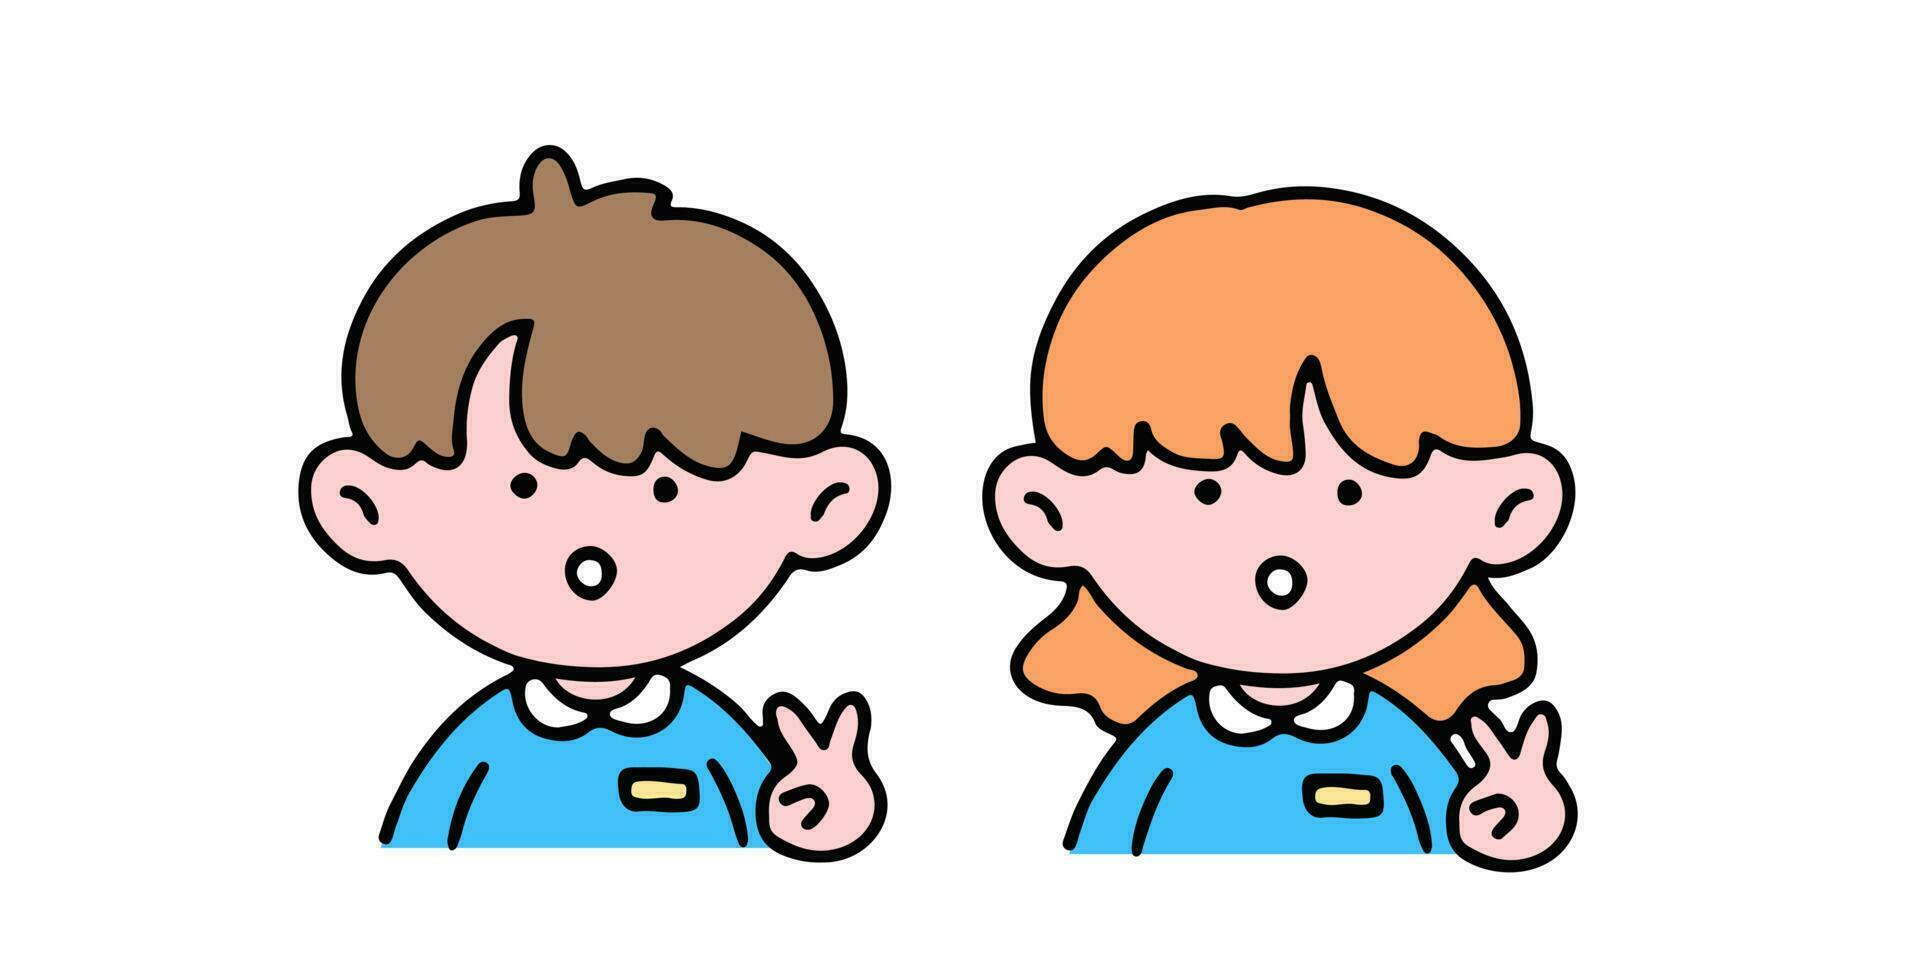 A little cute boy and girl showing victory hand, isolated on a background vector illustration.